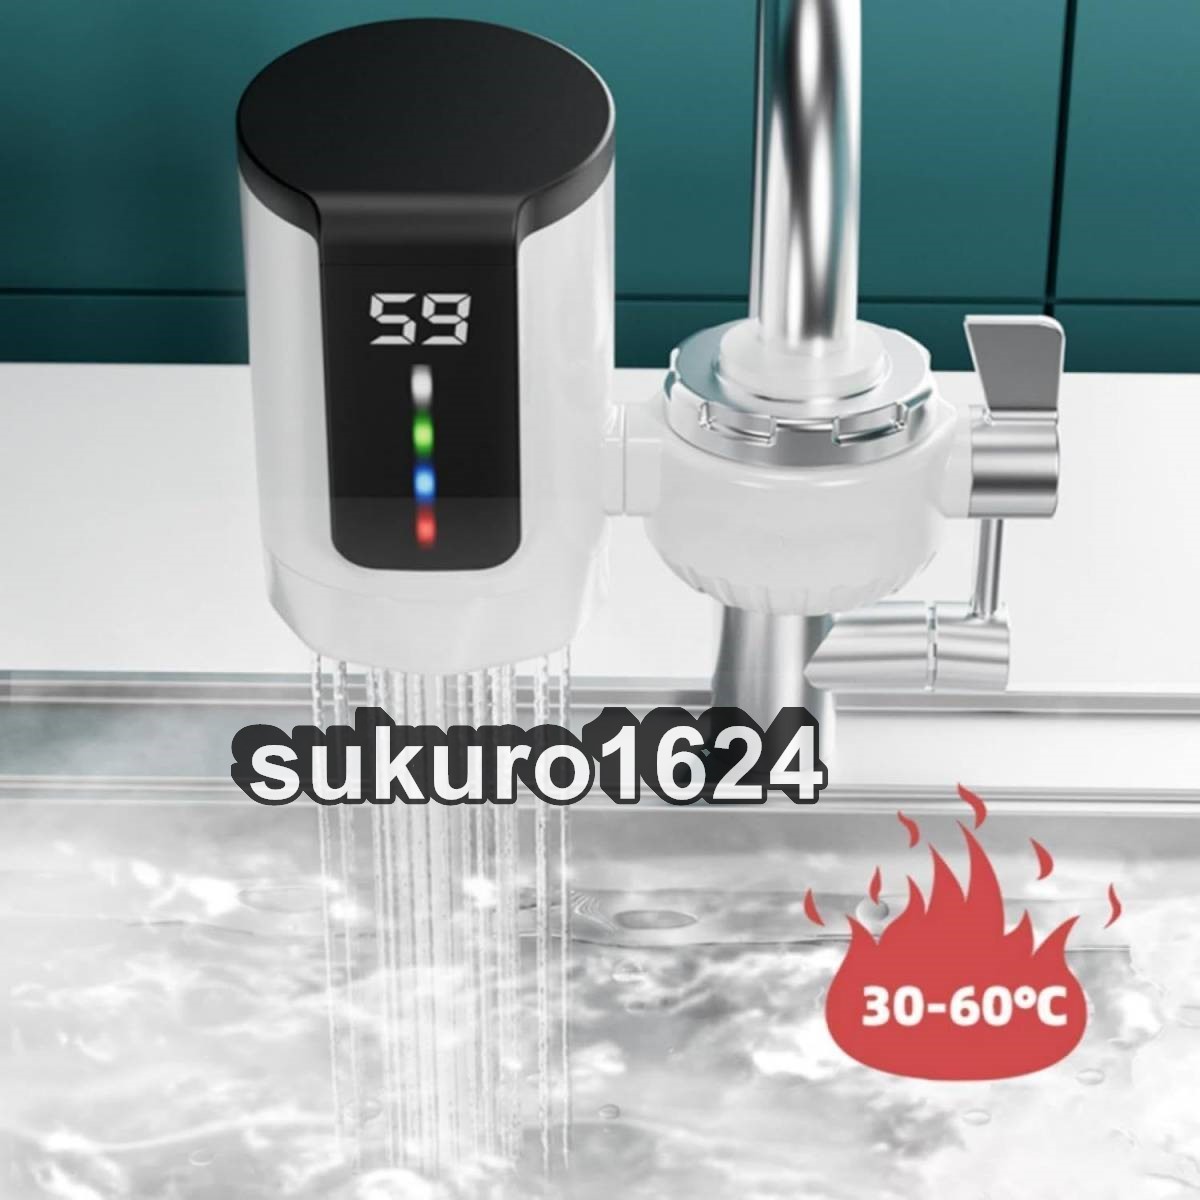  electric faucet electric hot water heater 3 second heating LEDtei attaching warm . electric water heater electric hot water vessel easy installation home use electric faucet 3000W/110V kitchen 